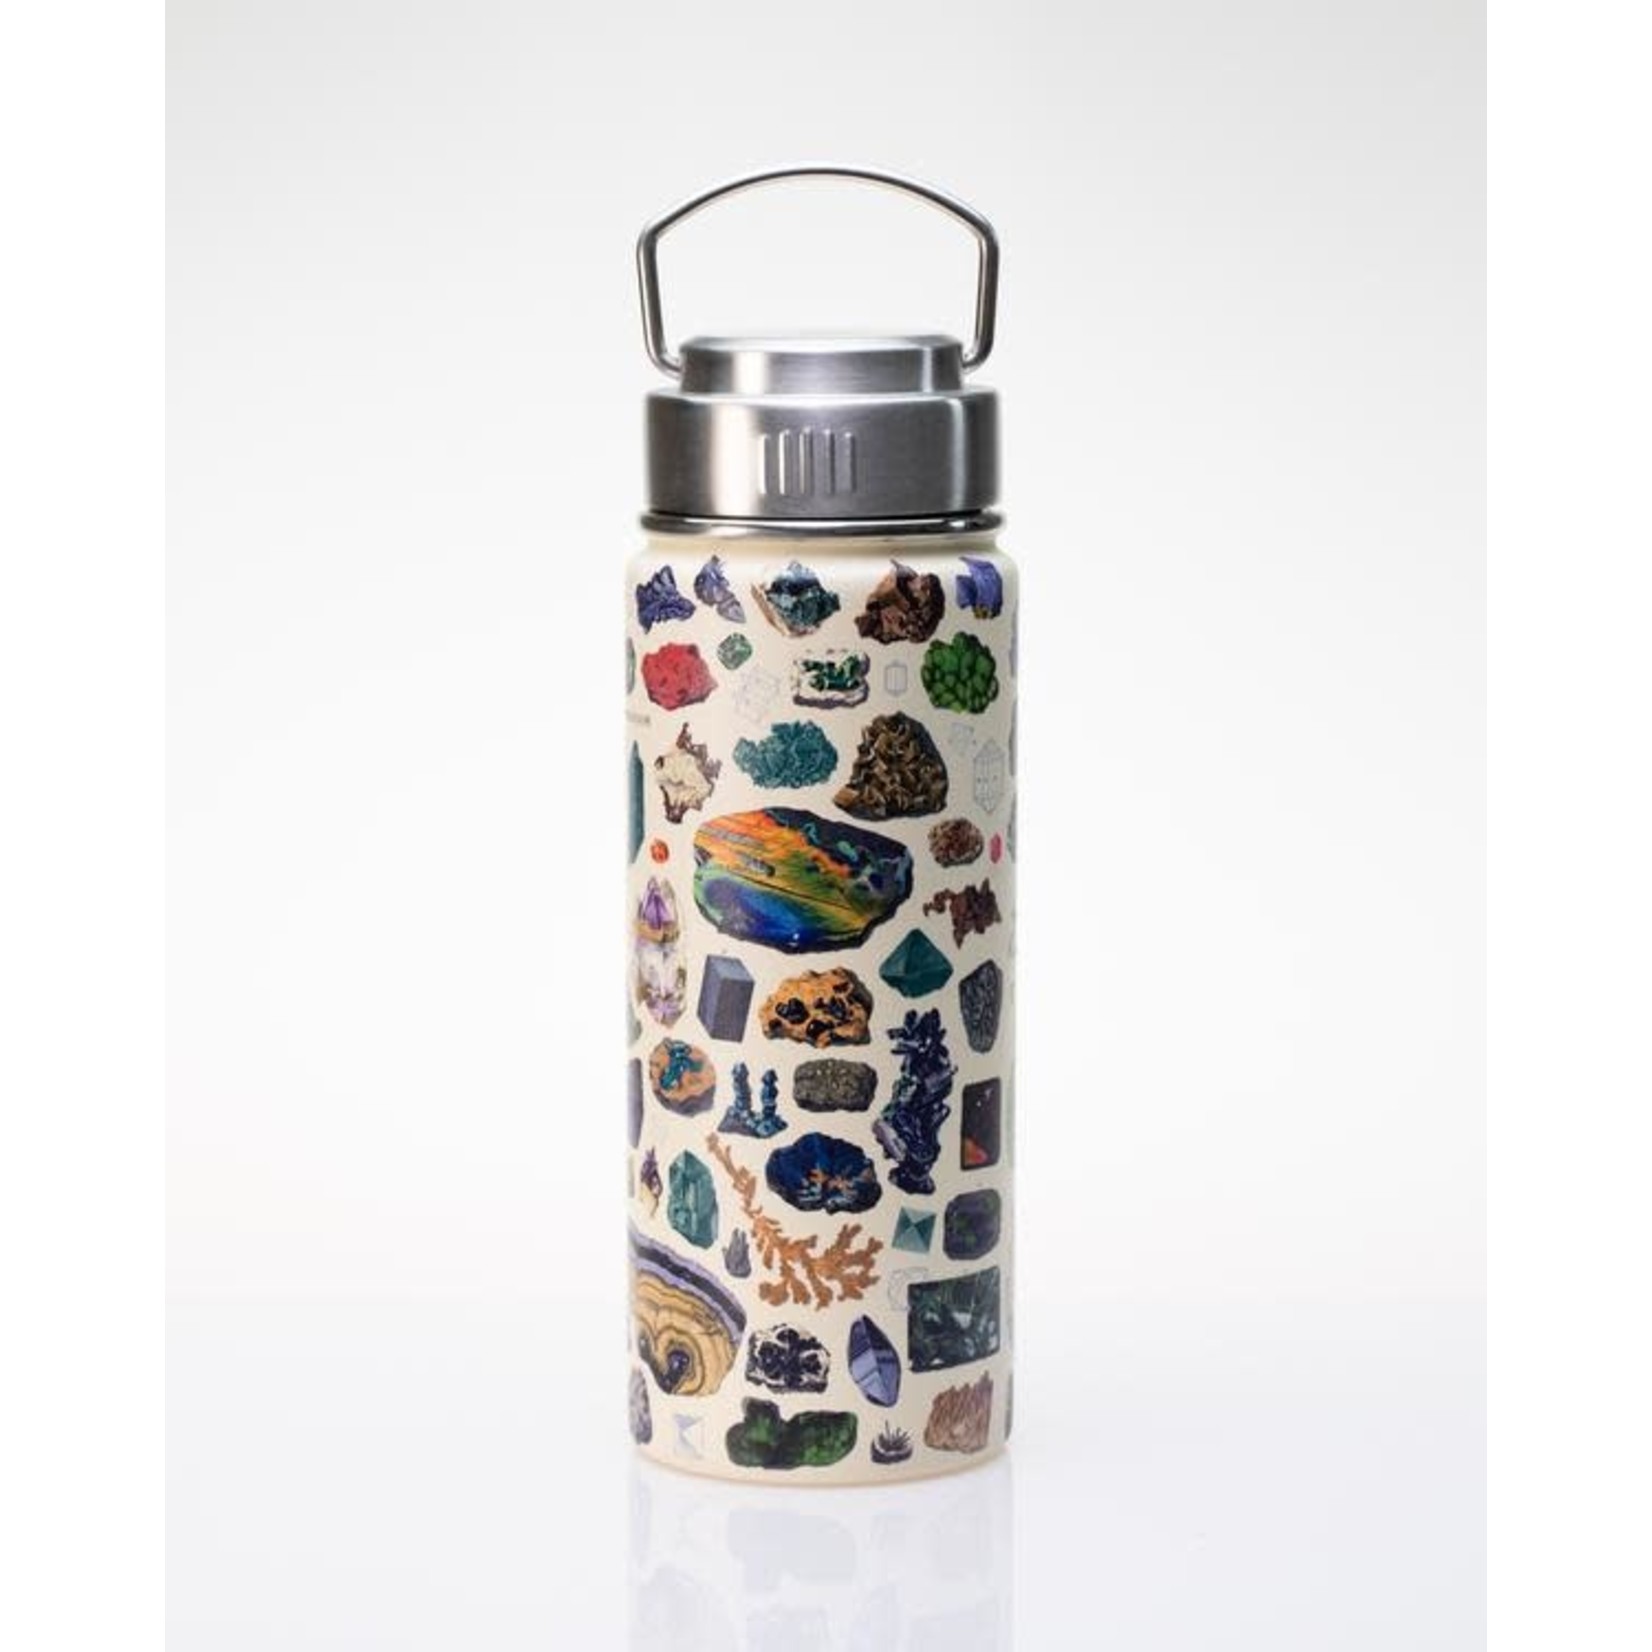 Science and Technology Gems & Minerals Stainless Steel Vacuum Flask